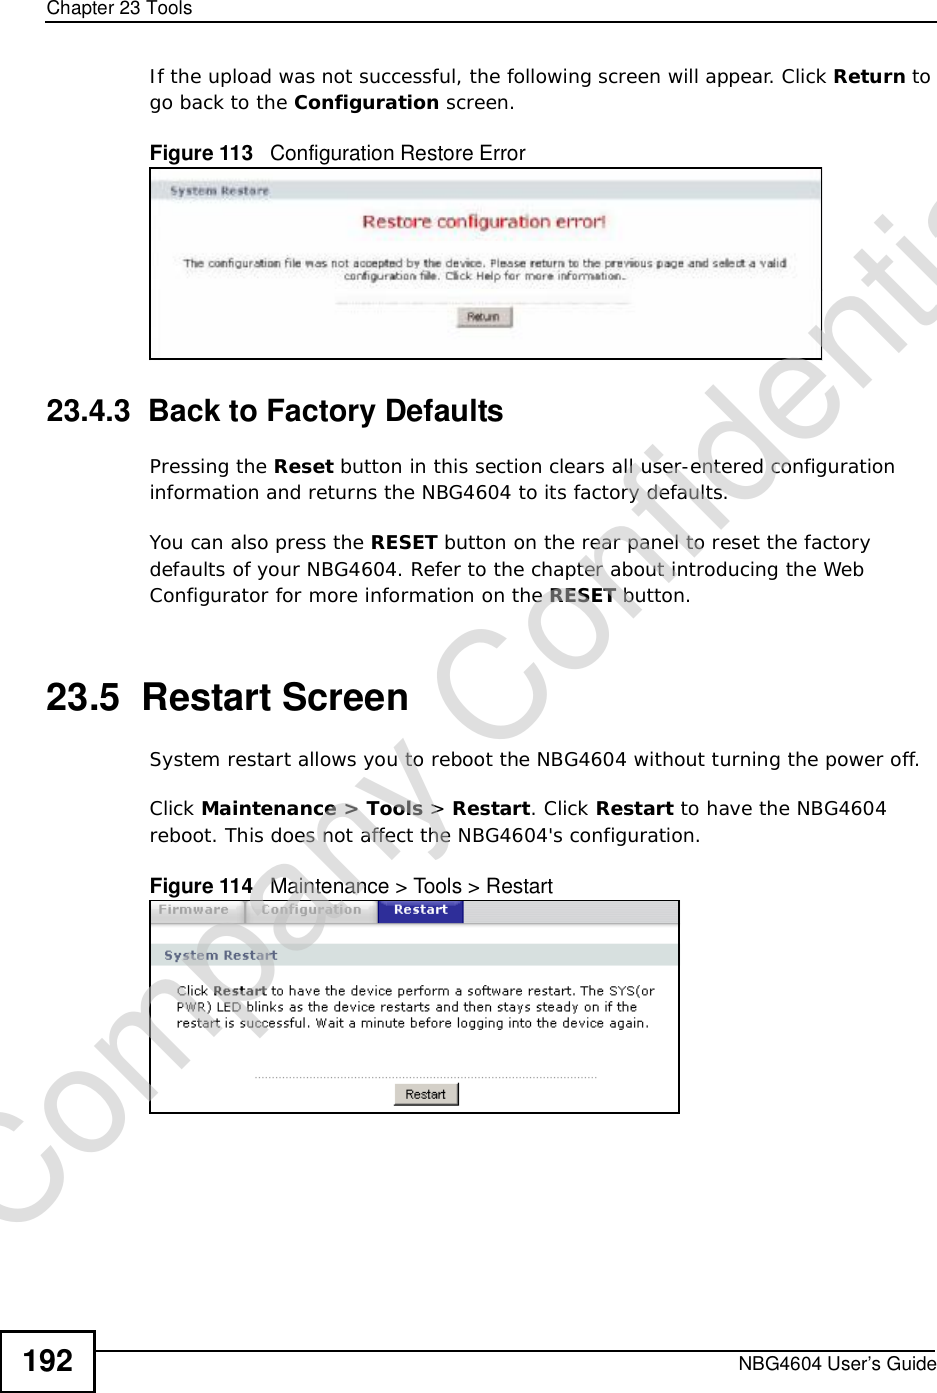 Chapter 23ToolsNBG4604 User’s Guide192If the upload was not successful, the following screen will appear. Click Return to go back to the Configuration screen.Figure 113   Configuration Restore Error23.4.3  Back to Factory DefaultsPressing the Reset button in this section clears all user-entered configuration information and returns the NBG4604 to its factory defaults.You can also press the RESET button on the rear panel to reset the factory defaults of your NBG4604. Refer to the chapter about introducing the Web Configurator for more information on the RESET button.23.5  Restart ScreenSystem restart allows you to reboot the NBG4604 without turning the power off. Click Maintenance &gt; Tools &gt; Restart. Click Restart to have the NBG4604 reboot. This does not affect the NBG4604&apos;s configuration.Figure 114   Maintenance &gt; Tools &gt; Restart Company Confidential